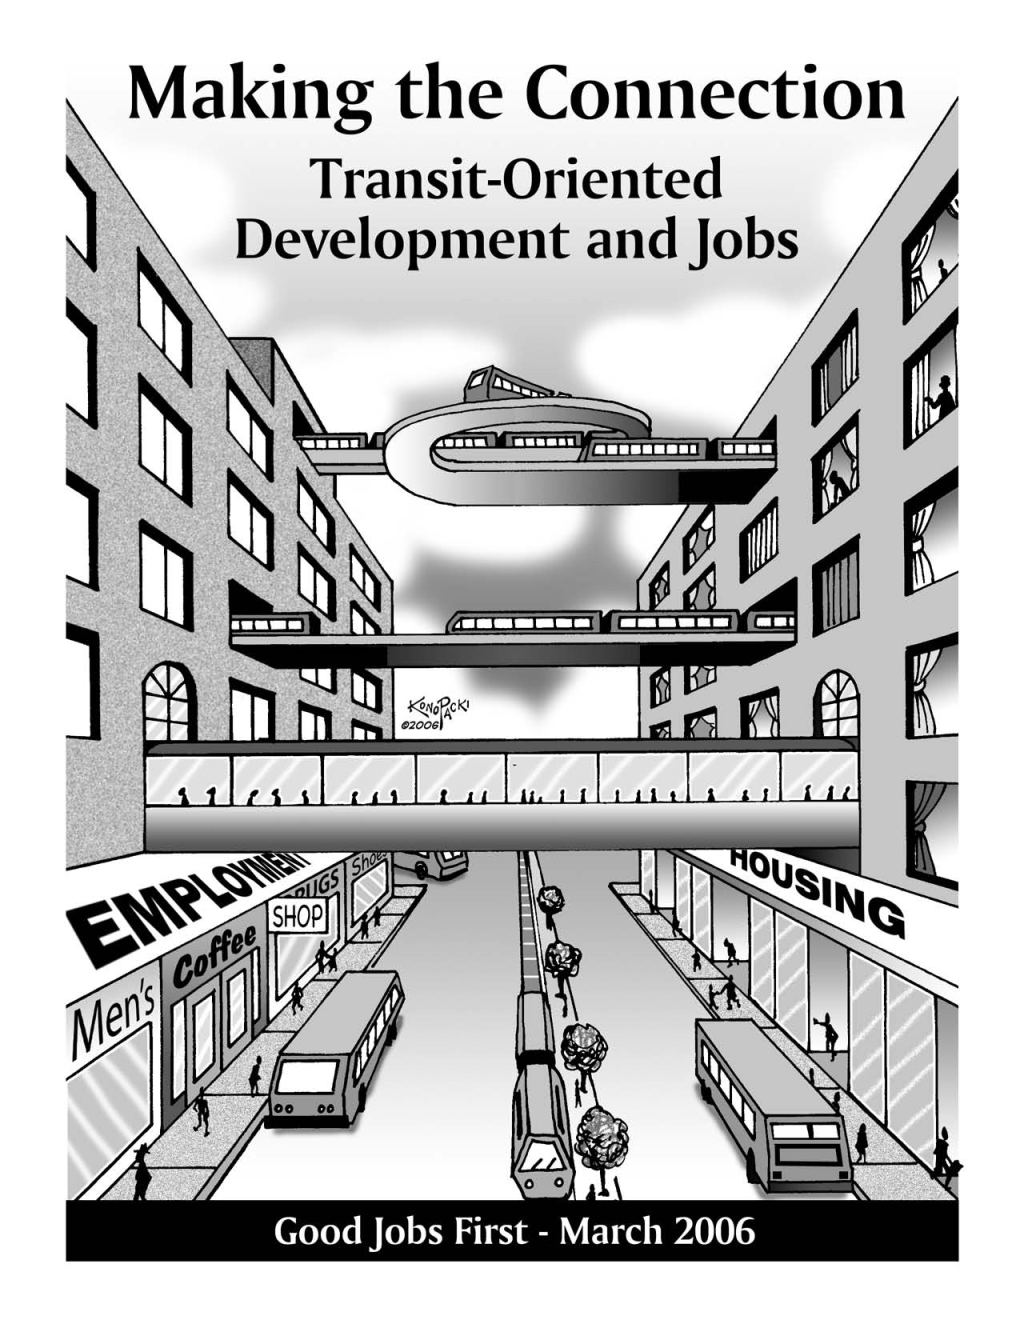 Transit-Oriented Development and Jobs